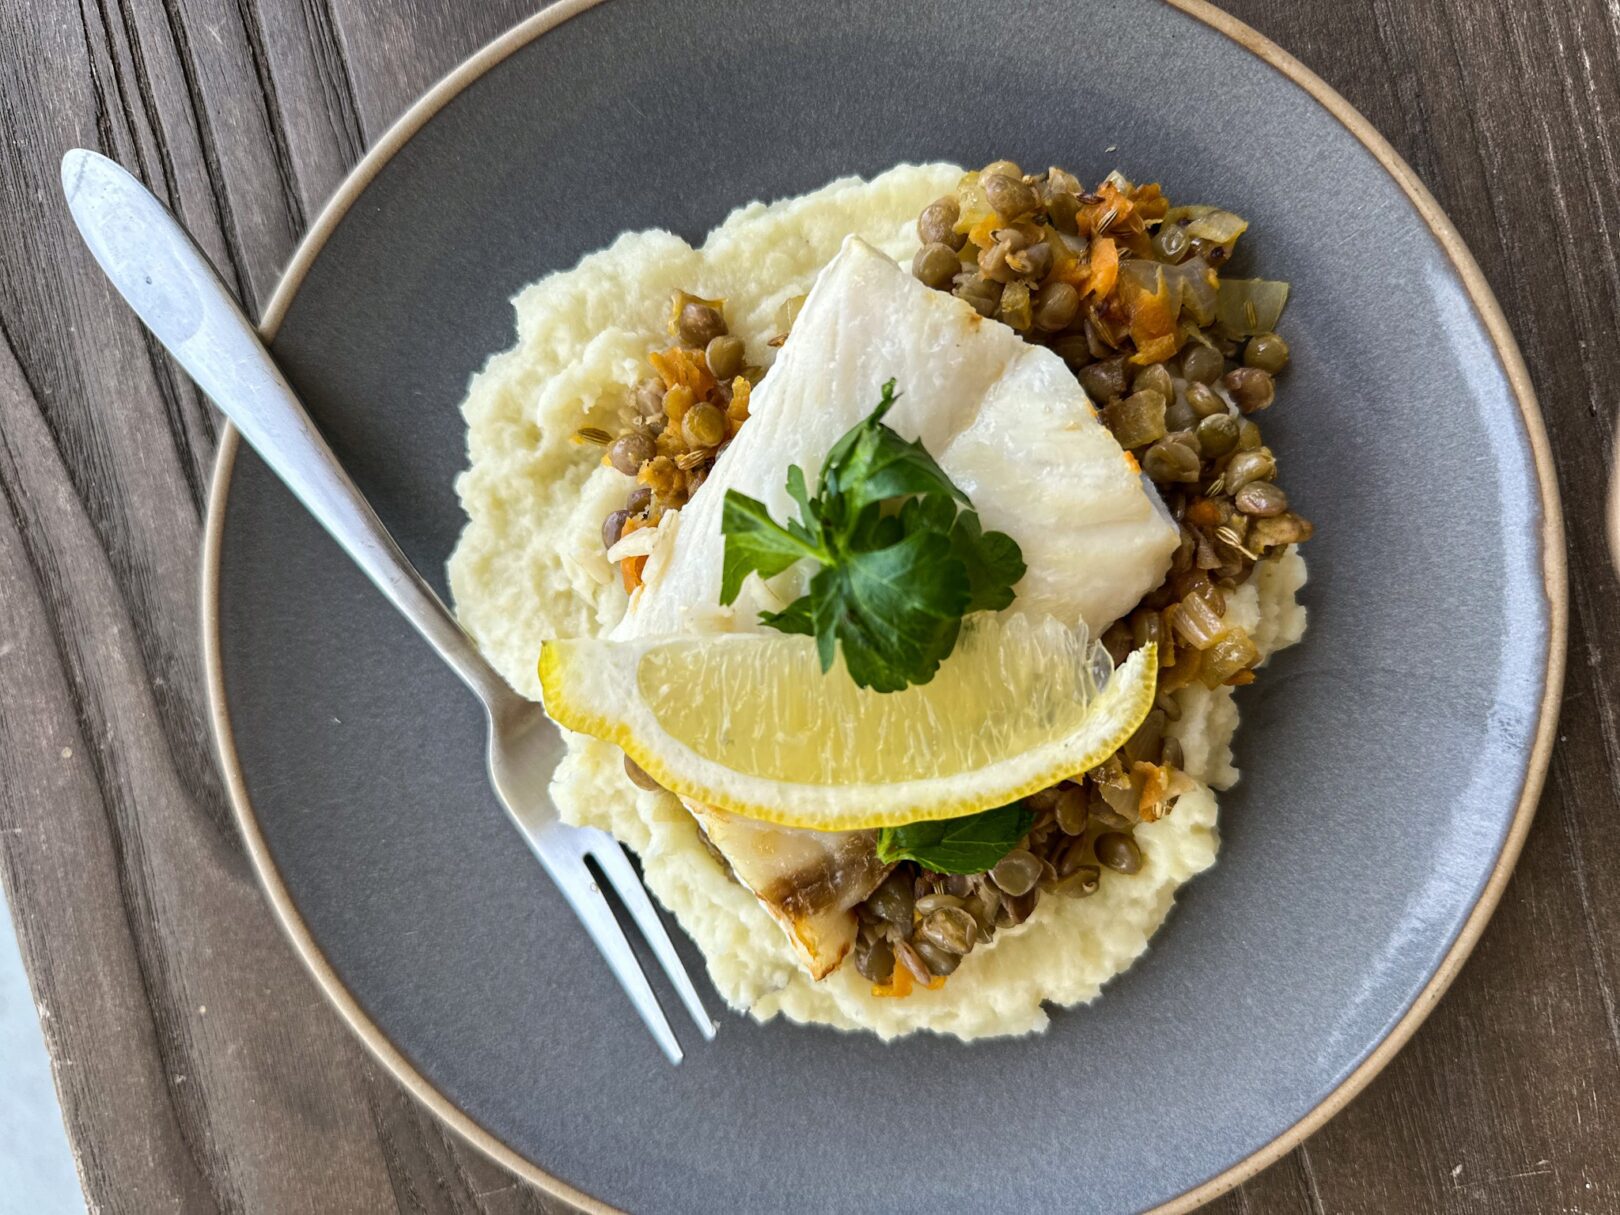 Rockfish with Lentils and Parsnip Puree